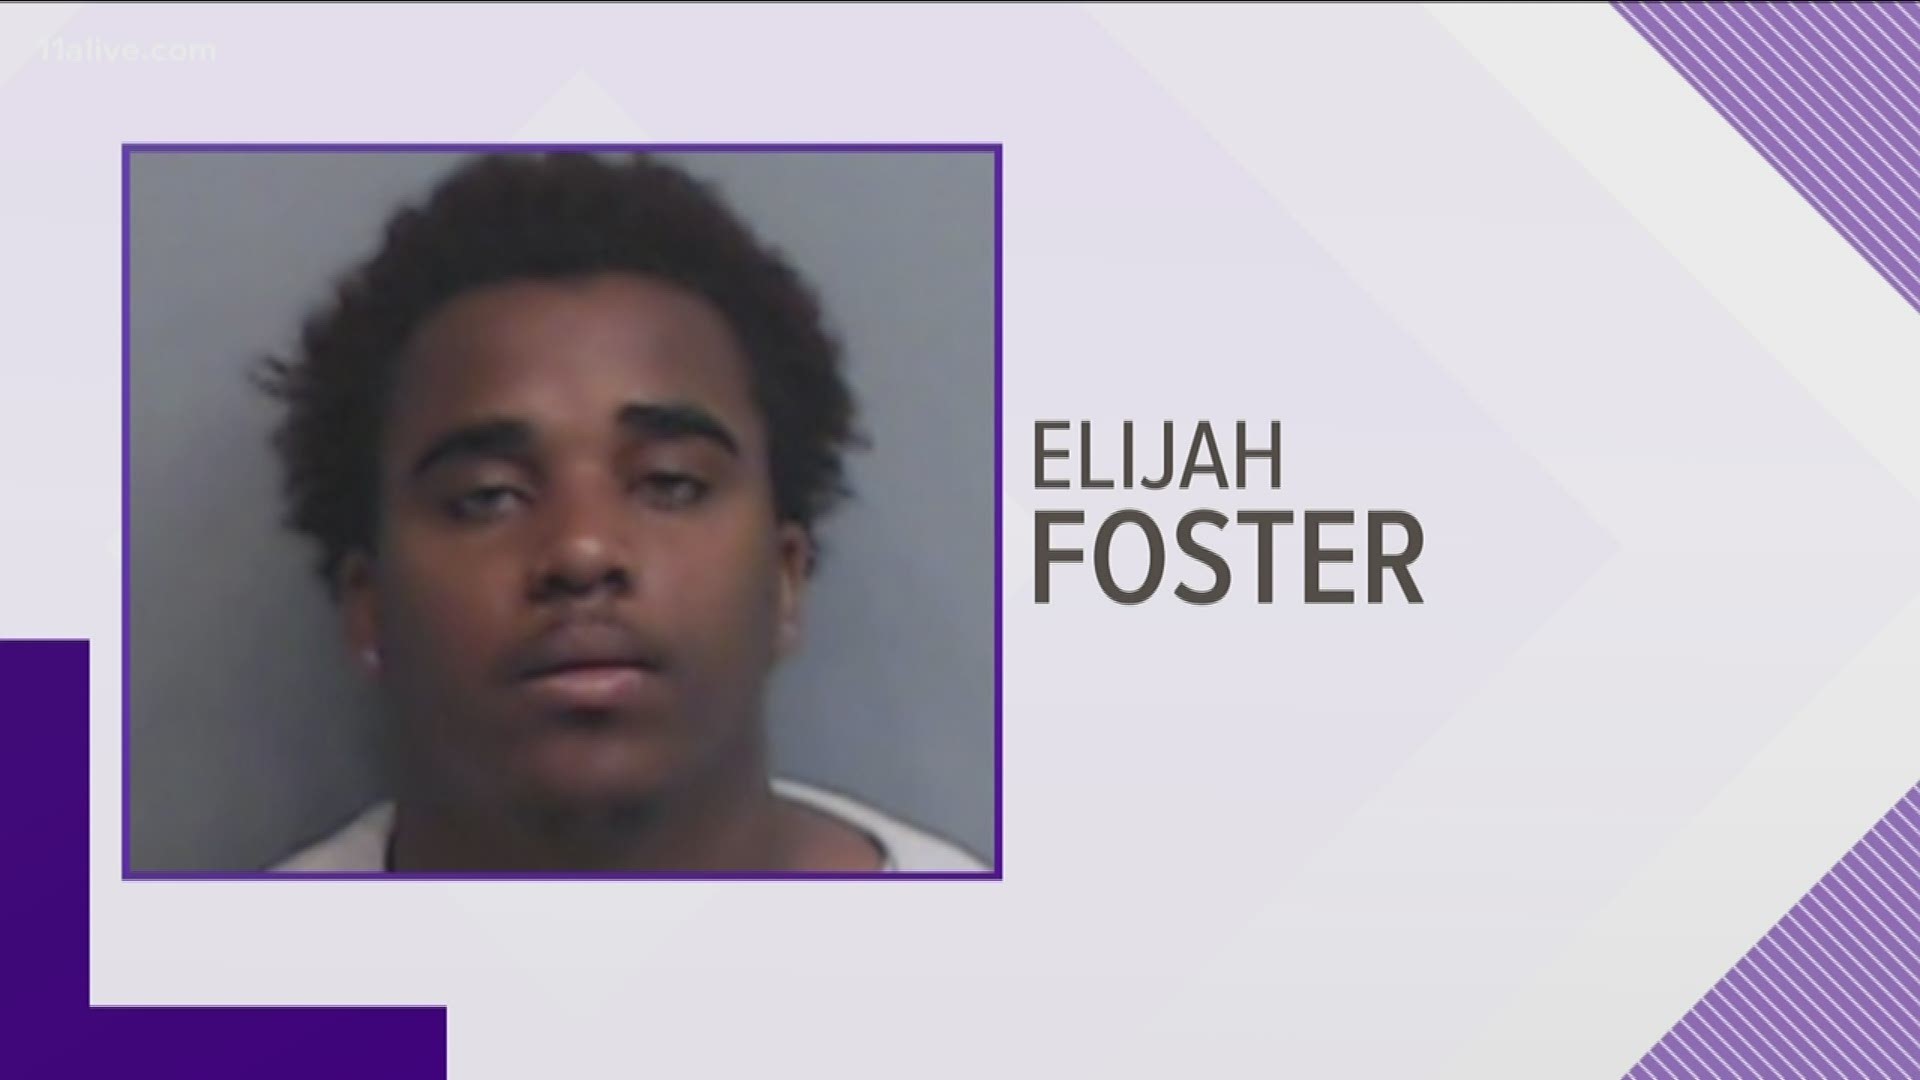 Elijah Foster, 18, is charged with concealing the death of another.